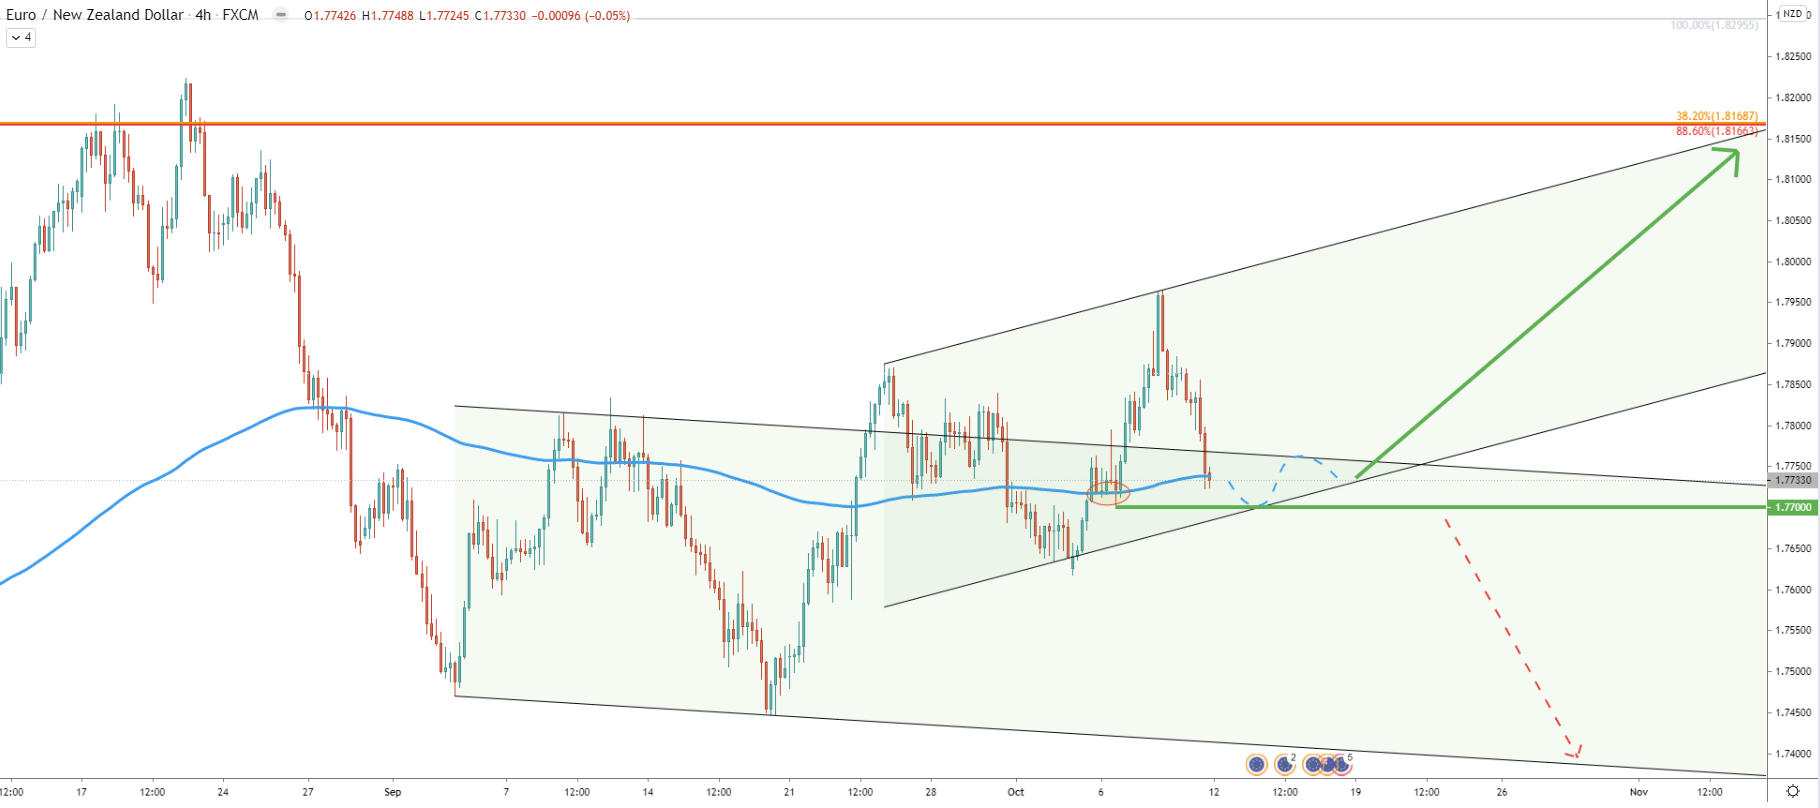 EUR/NZD 4-Hour Technical Analysis 9 Oct 2020